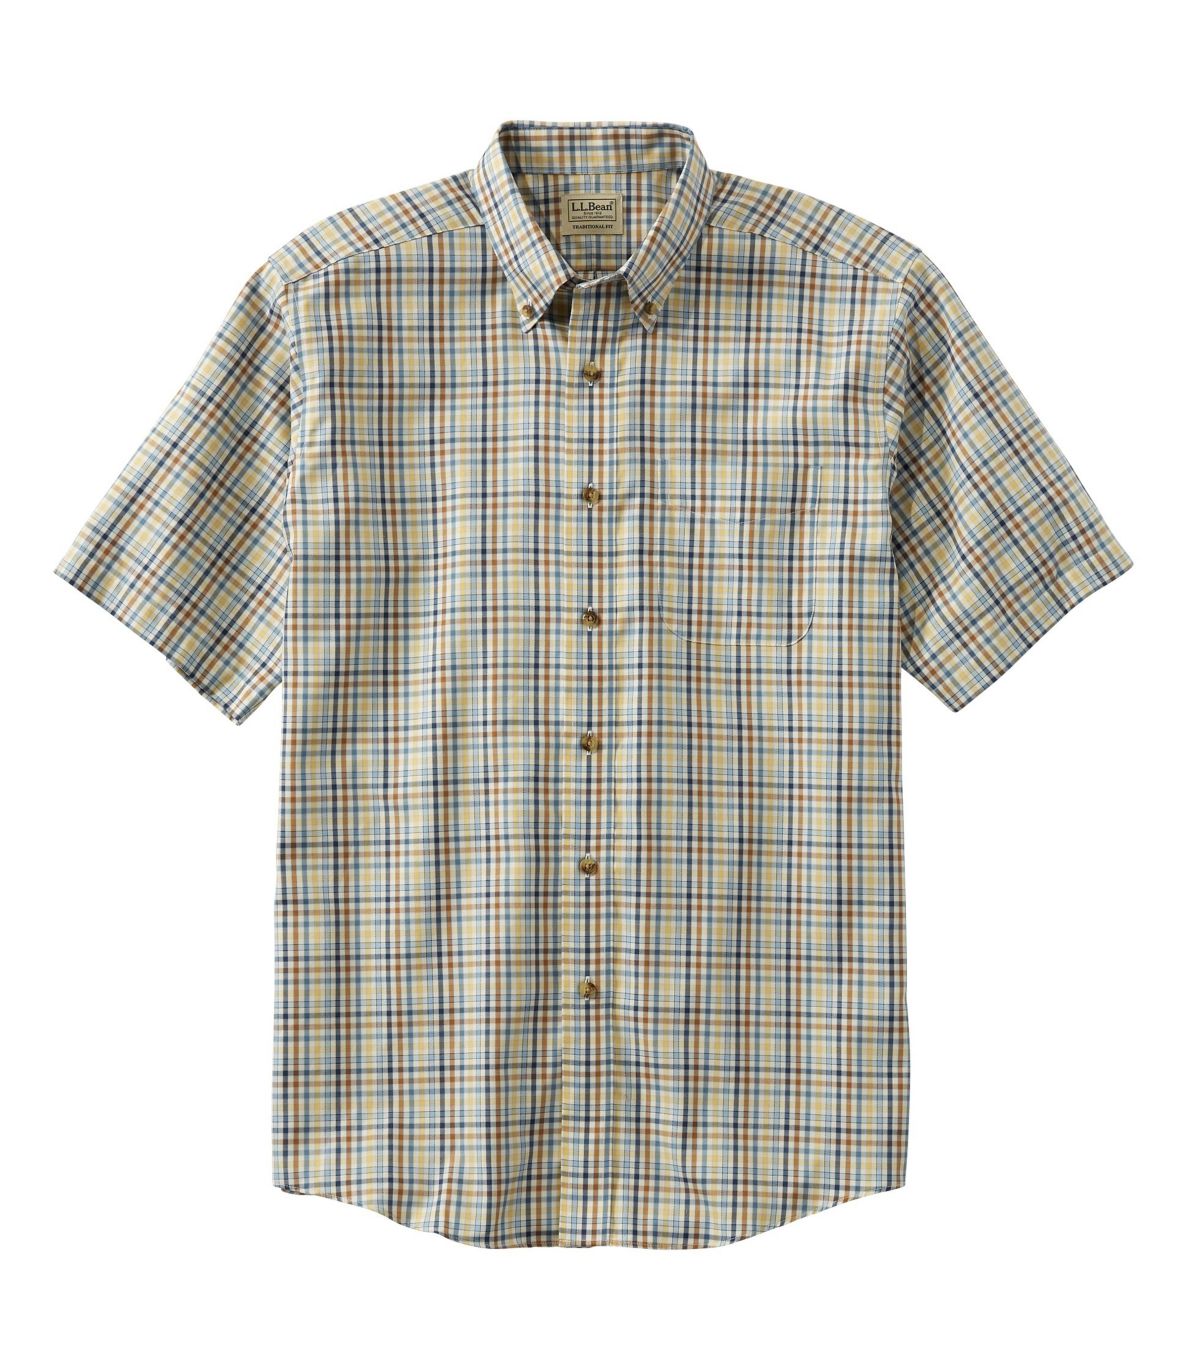 Men's Wrinkle-Free Twill Sport Shirt, Traditional Fit Short-Sleeve Plaid